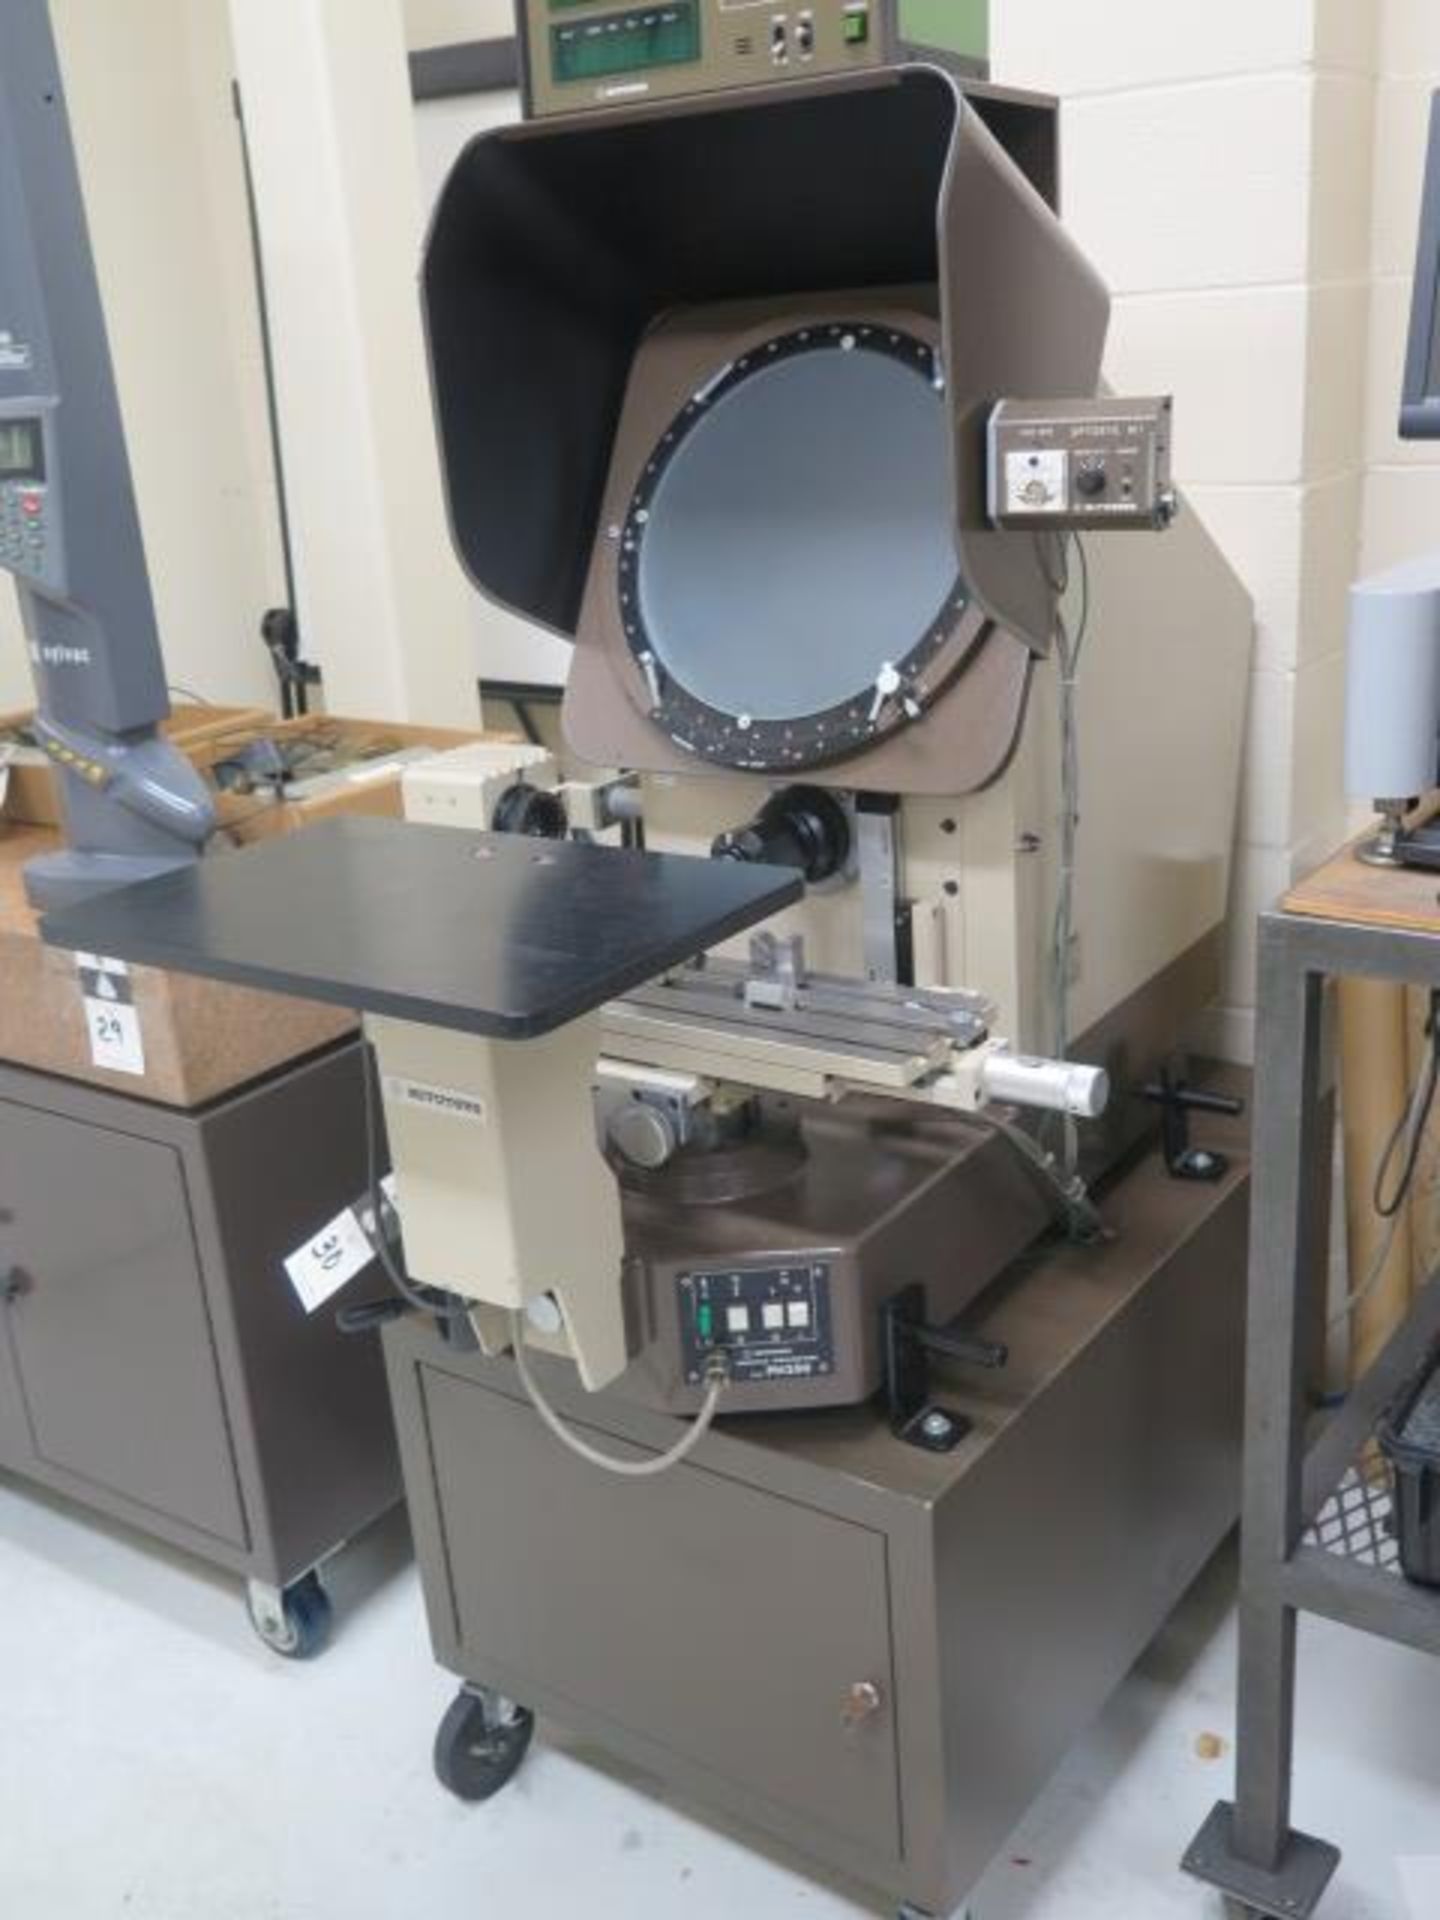 Mitutoyo PH-350 13” Optical Comparator s/n 60093 w/ Mitutoyo DRO, Mitutoyo M1 Edge Zone, SOLD AS IS - Image 3 of 18